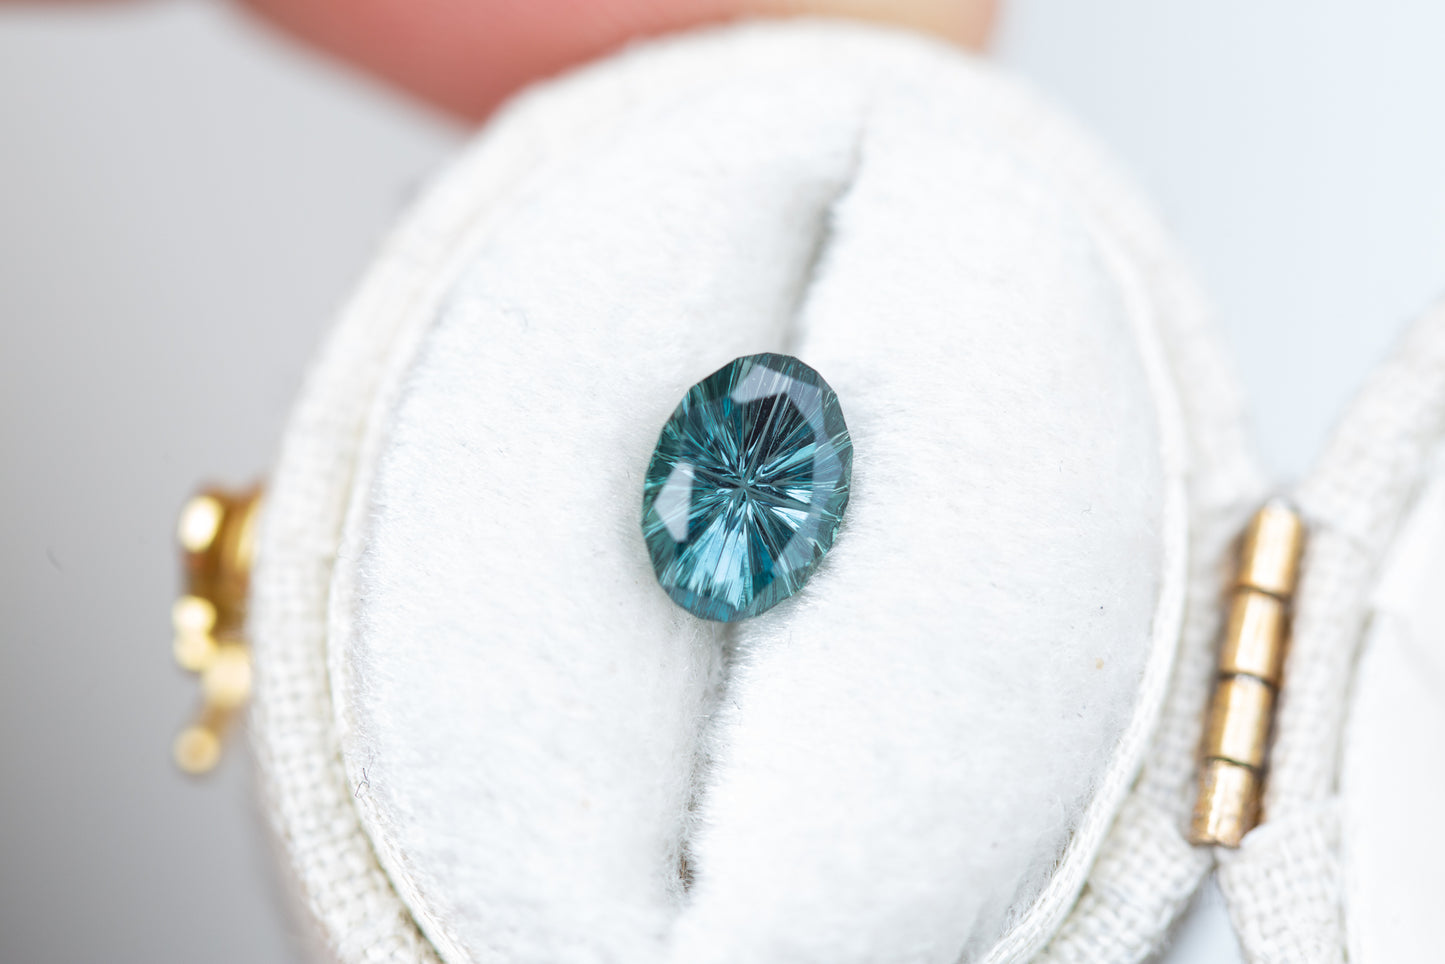 Load image into Gallery viewer, 1.13ct oval teal sapphire - starbrite cut by John Dyer
